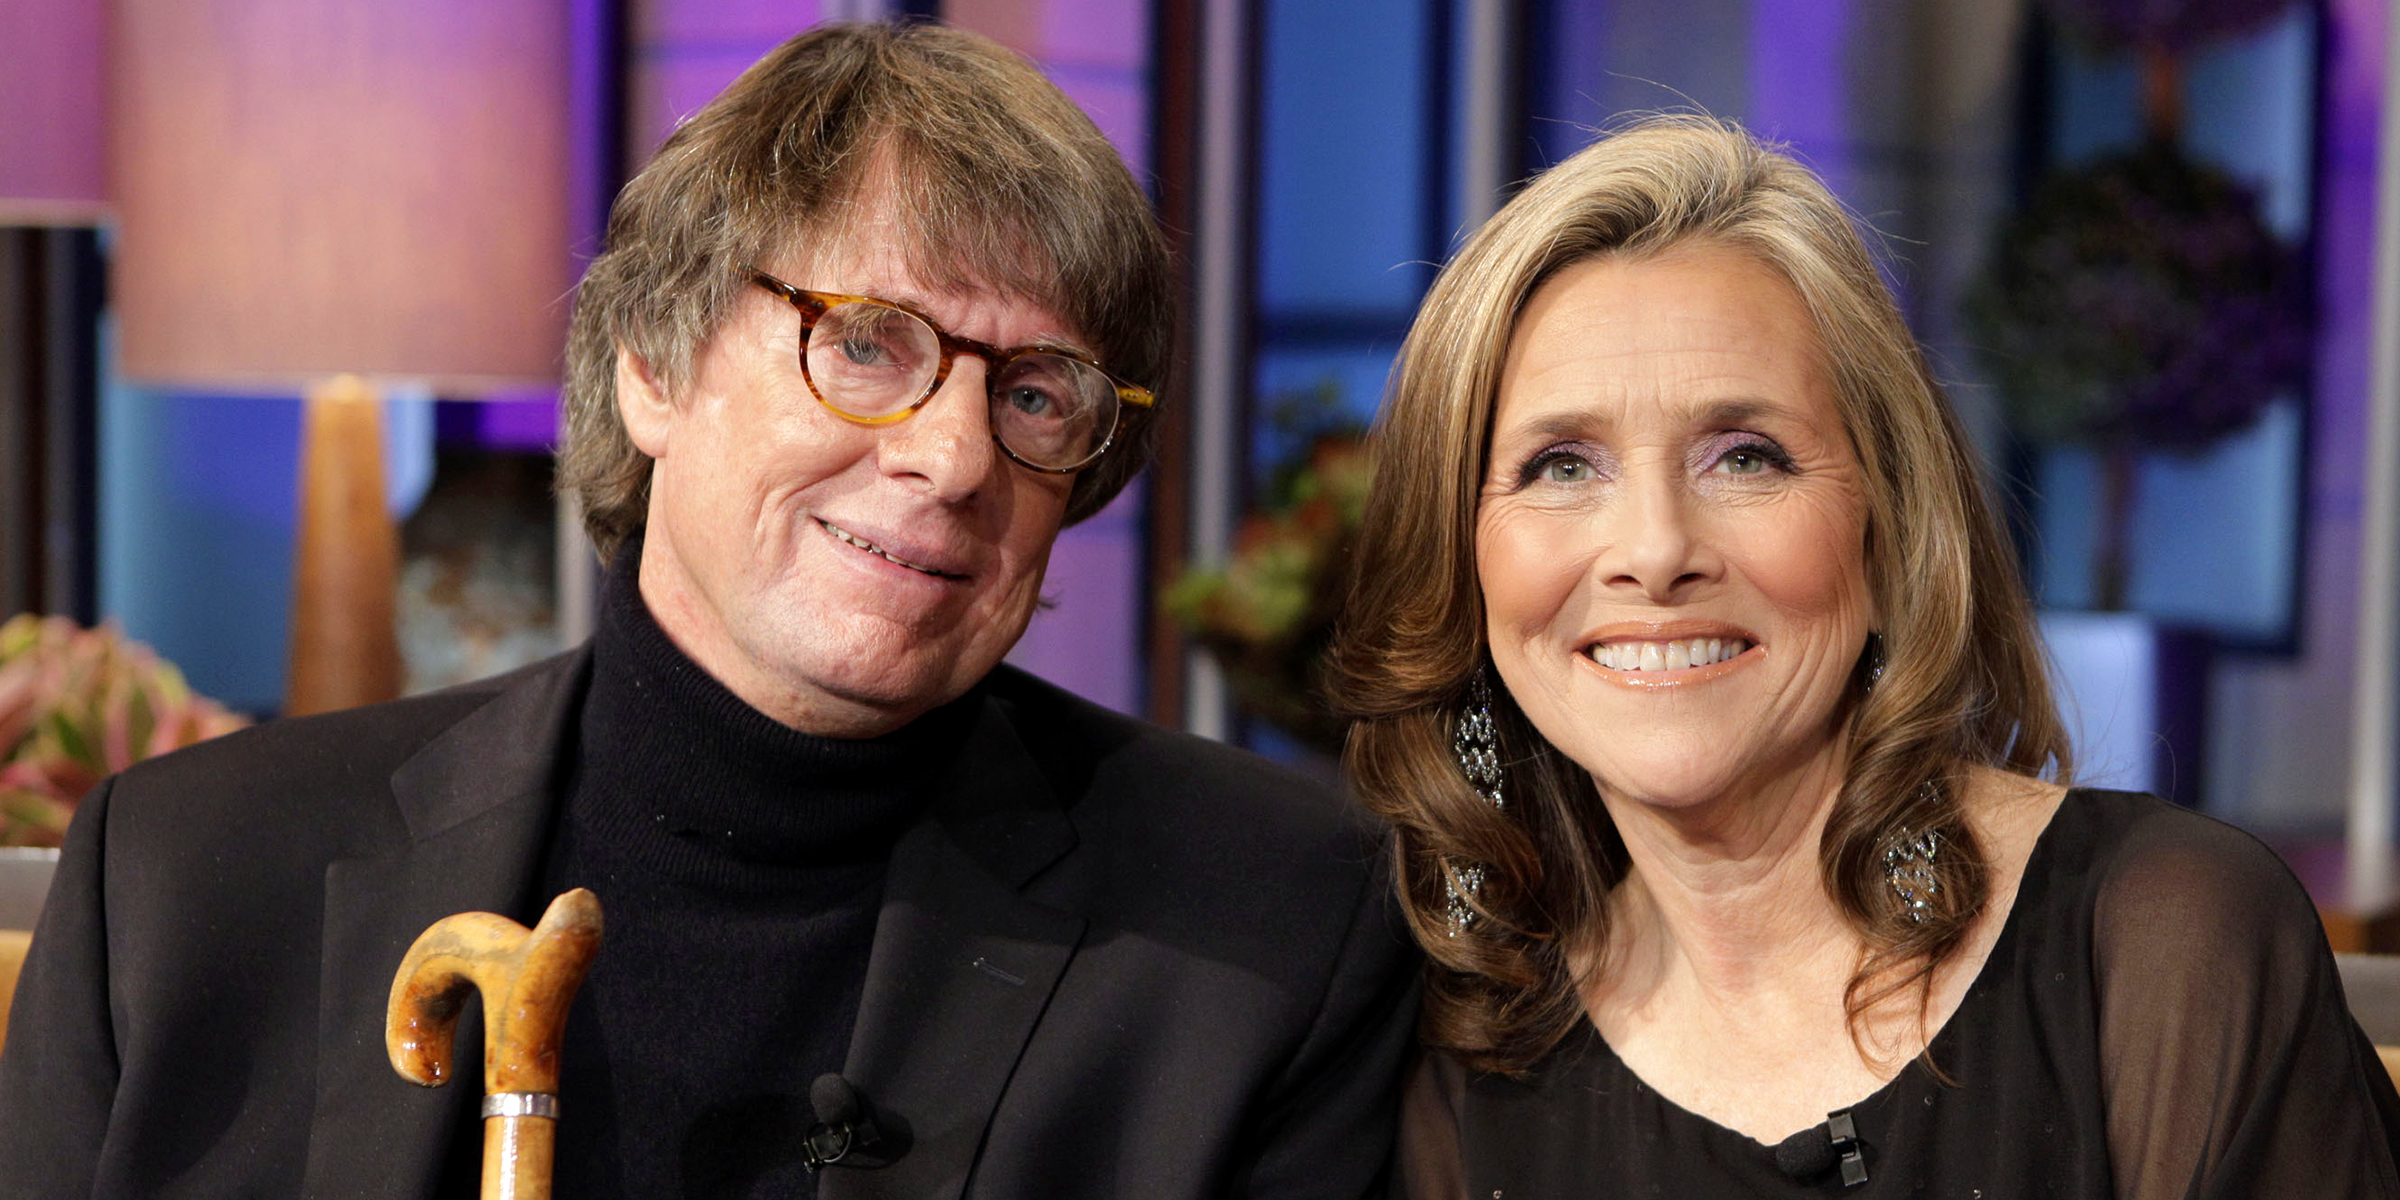 Richard Cohen and Meredith Vieira | Source: Getty Images